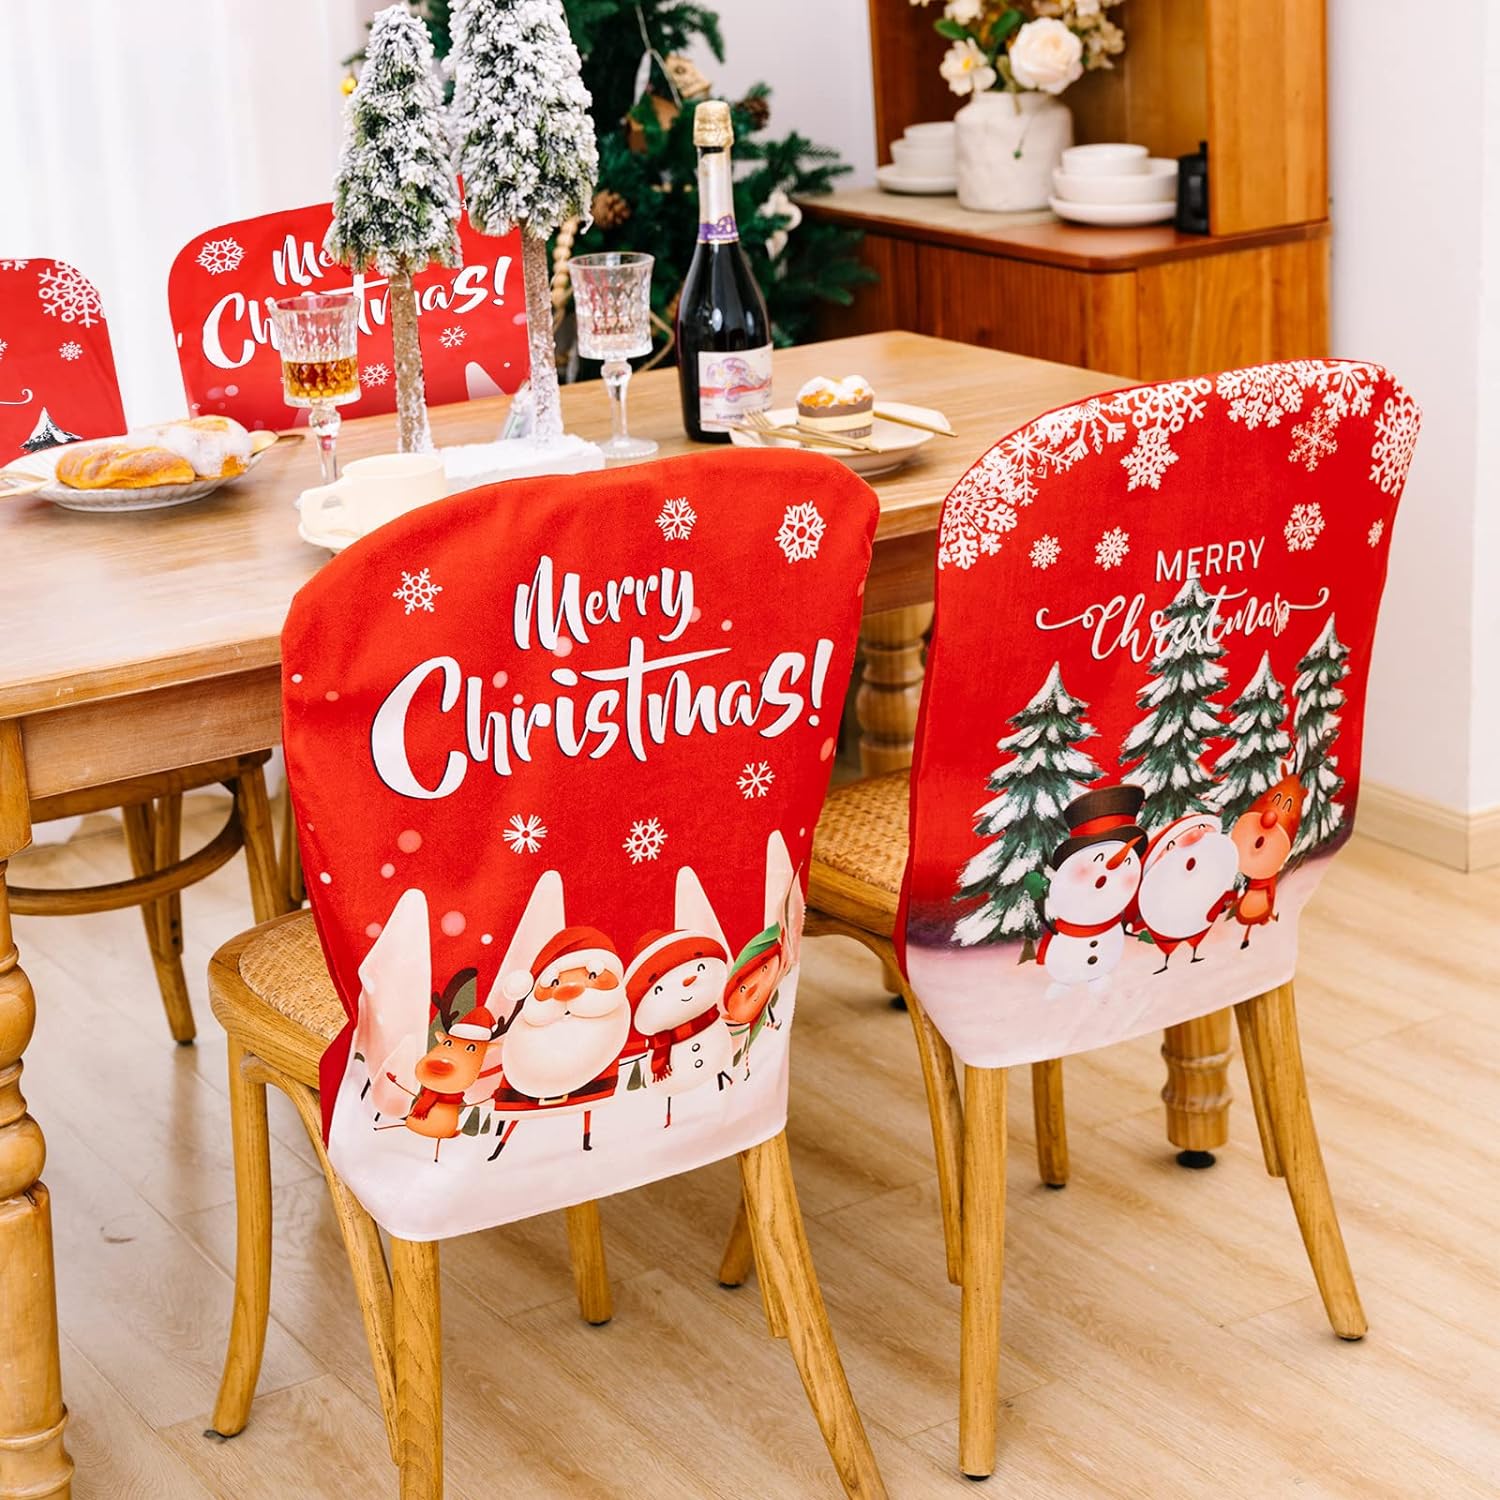 4 Pcs Christmas Chair Covers Christmas Themed Chair Back Cover Red and White Dinner Table Decoration for Xmas Party Celebrations